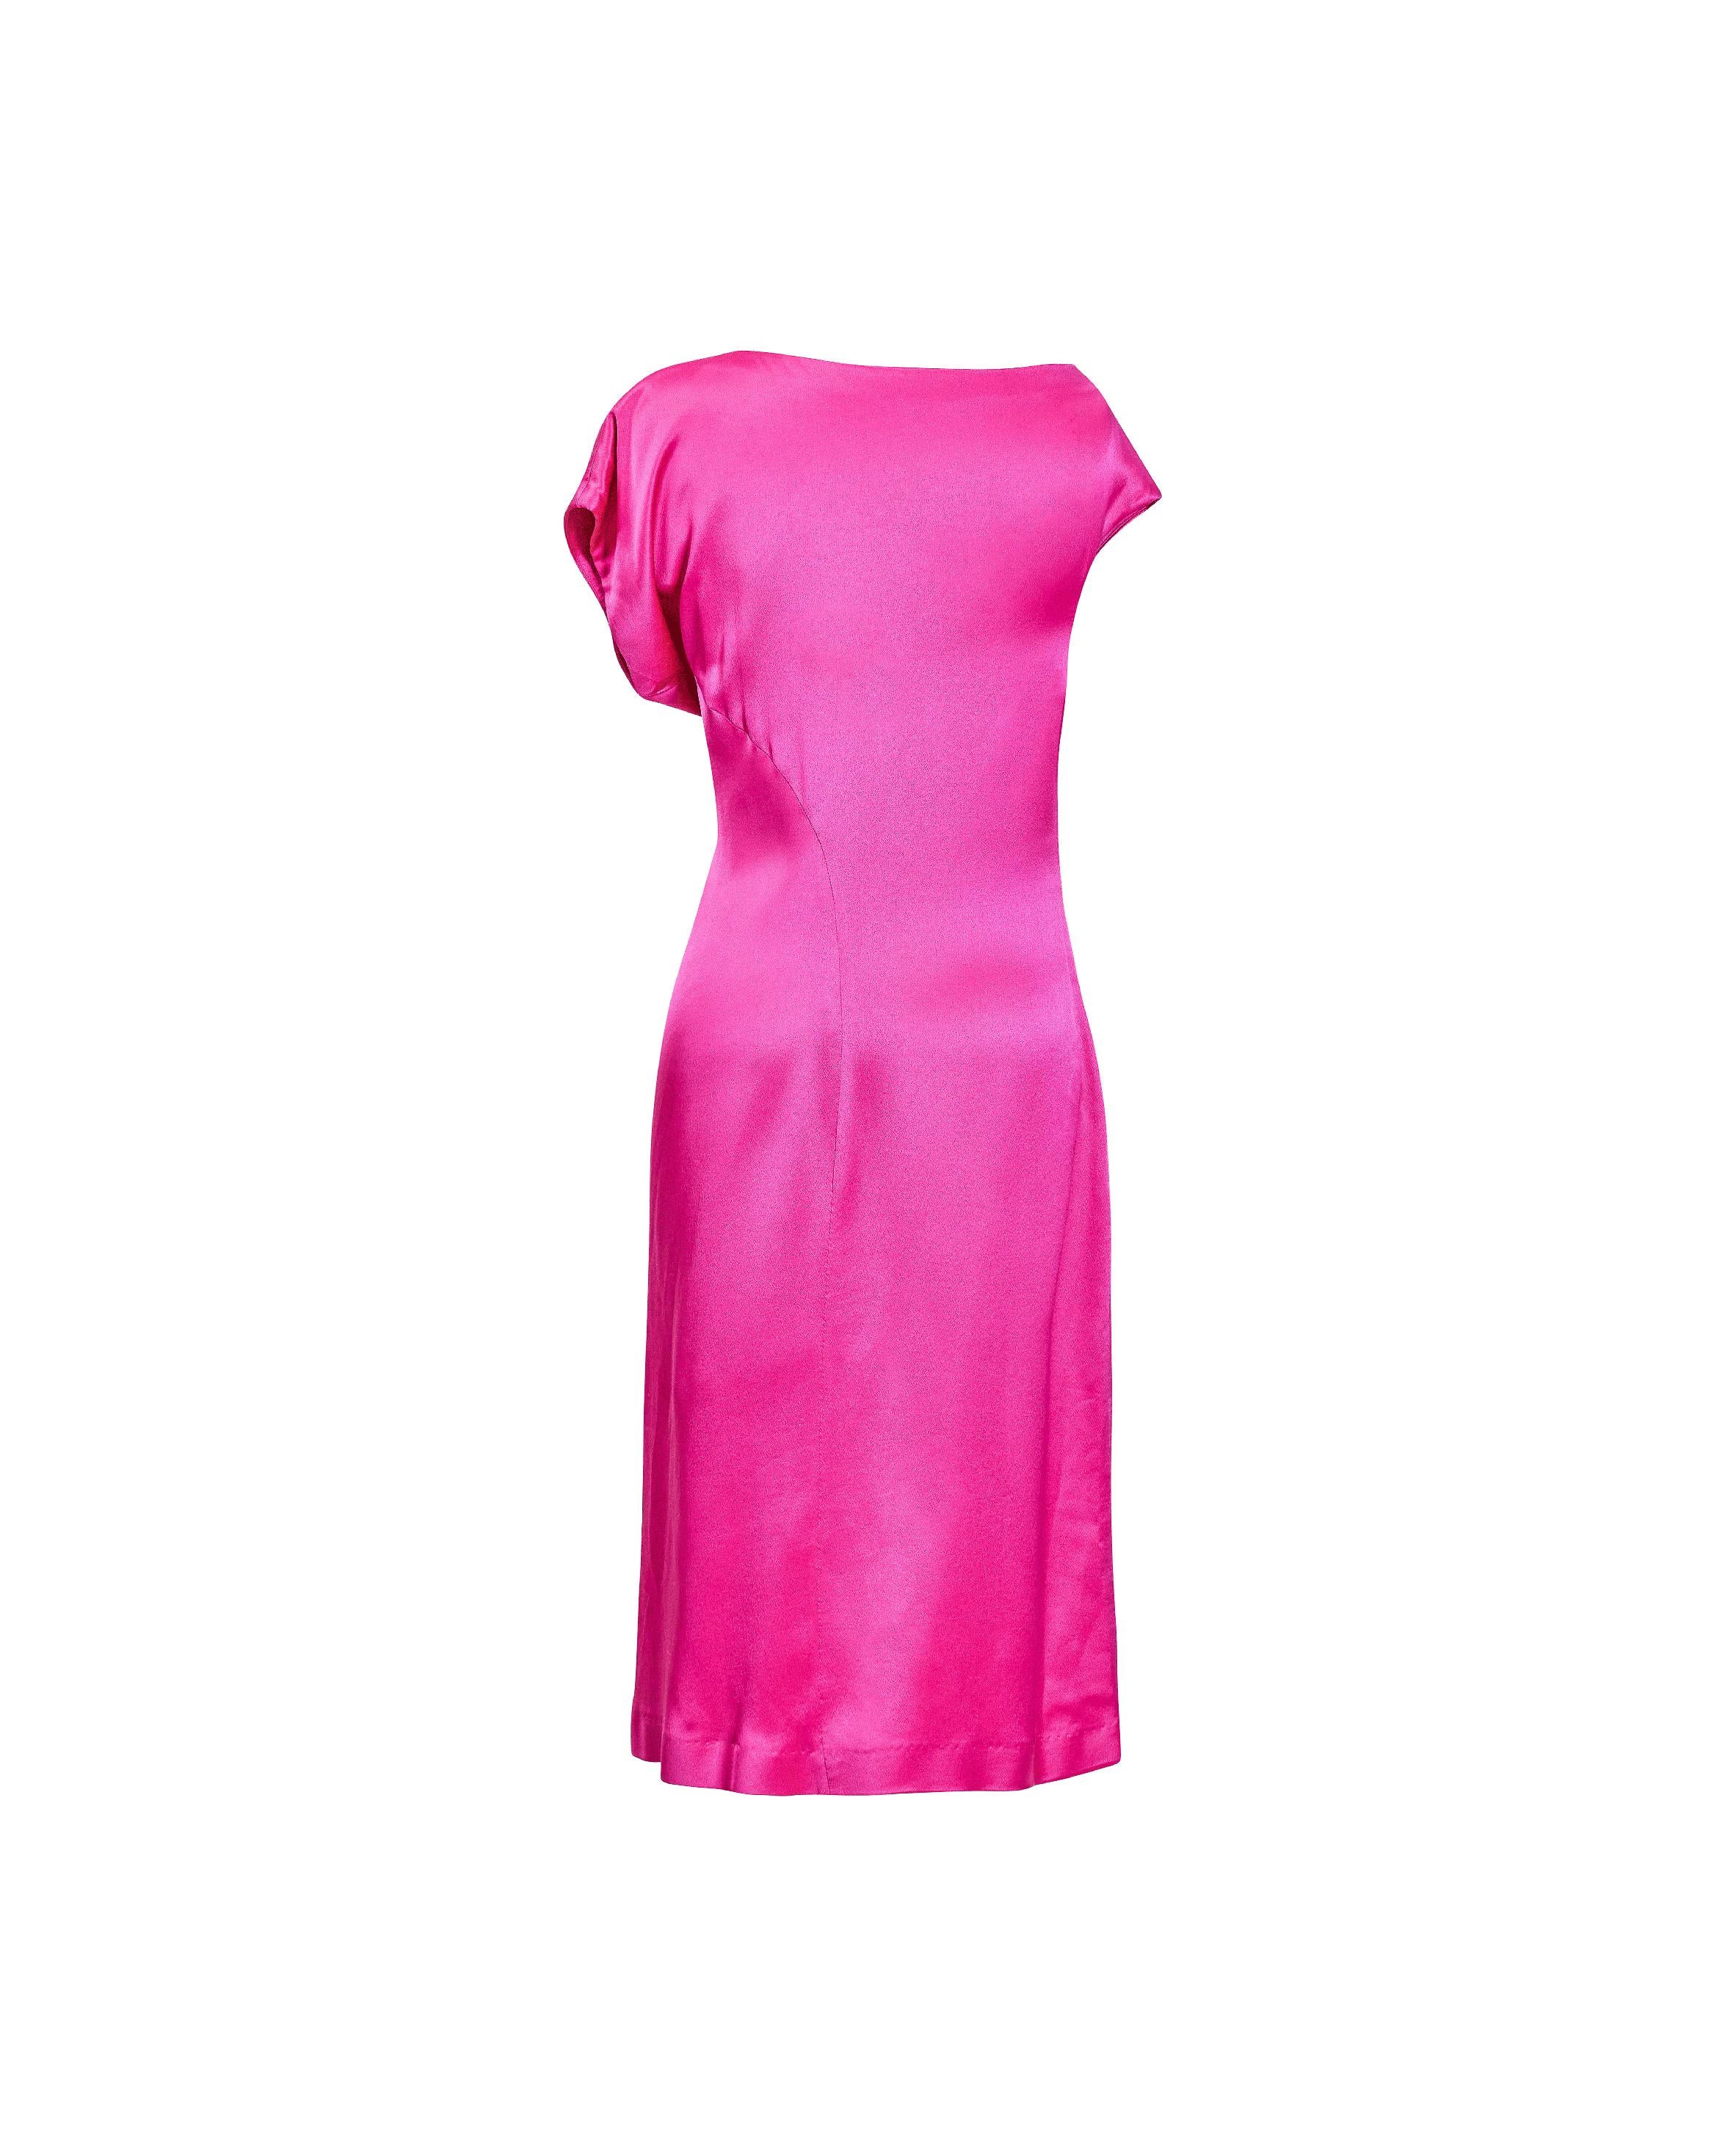 S/S 2008 Alexander McQueen Hot Pink Silk Charmeuse Asymmetrical Midi Dress In Excellent Condition In North Hollywood, CA